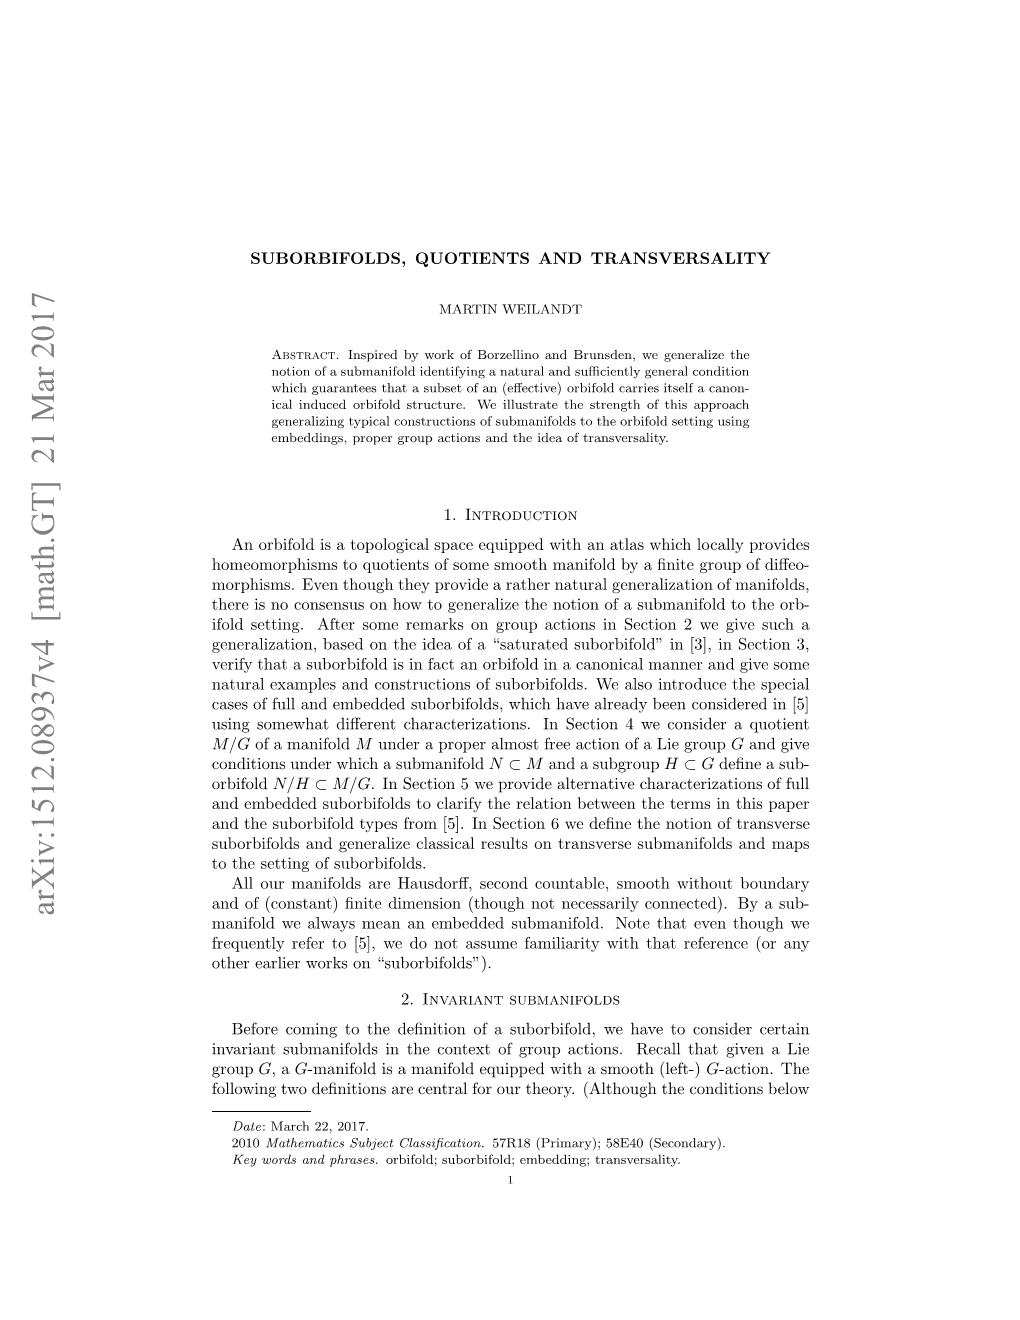 Suborbifolds, Quotients and Transversality 3